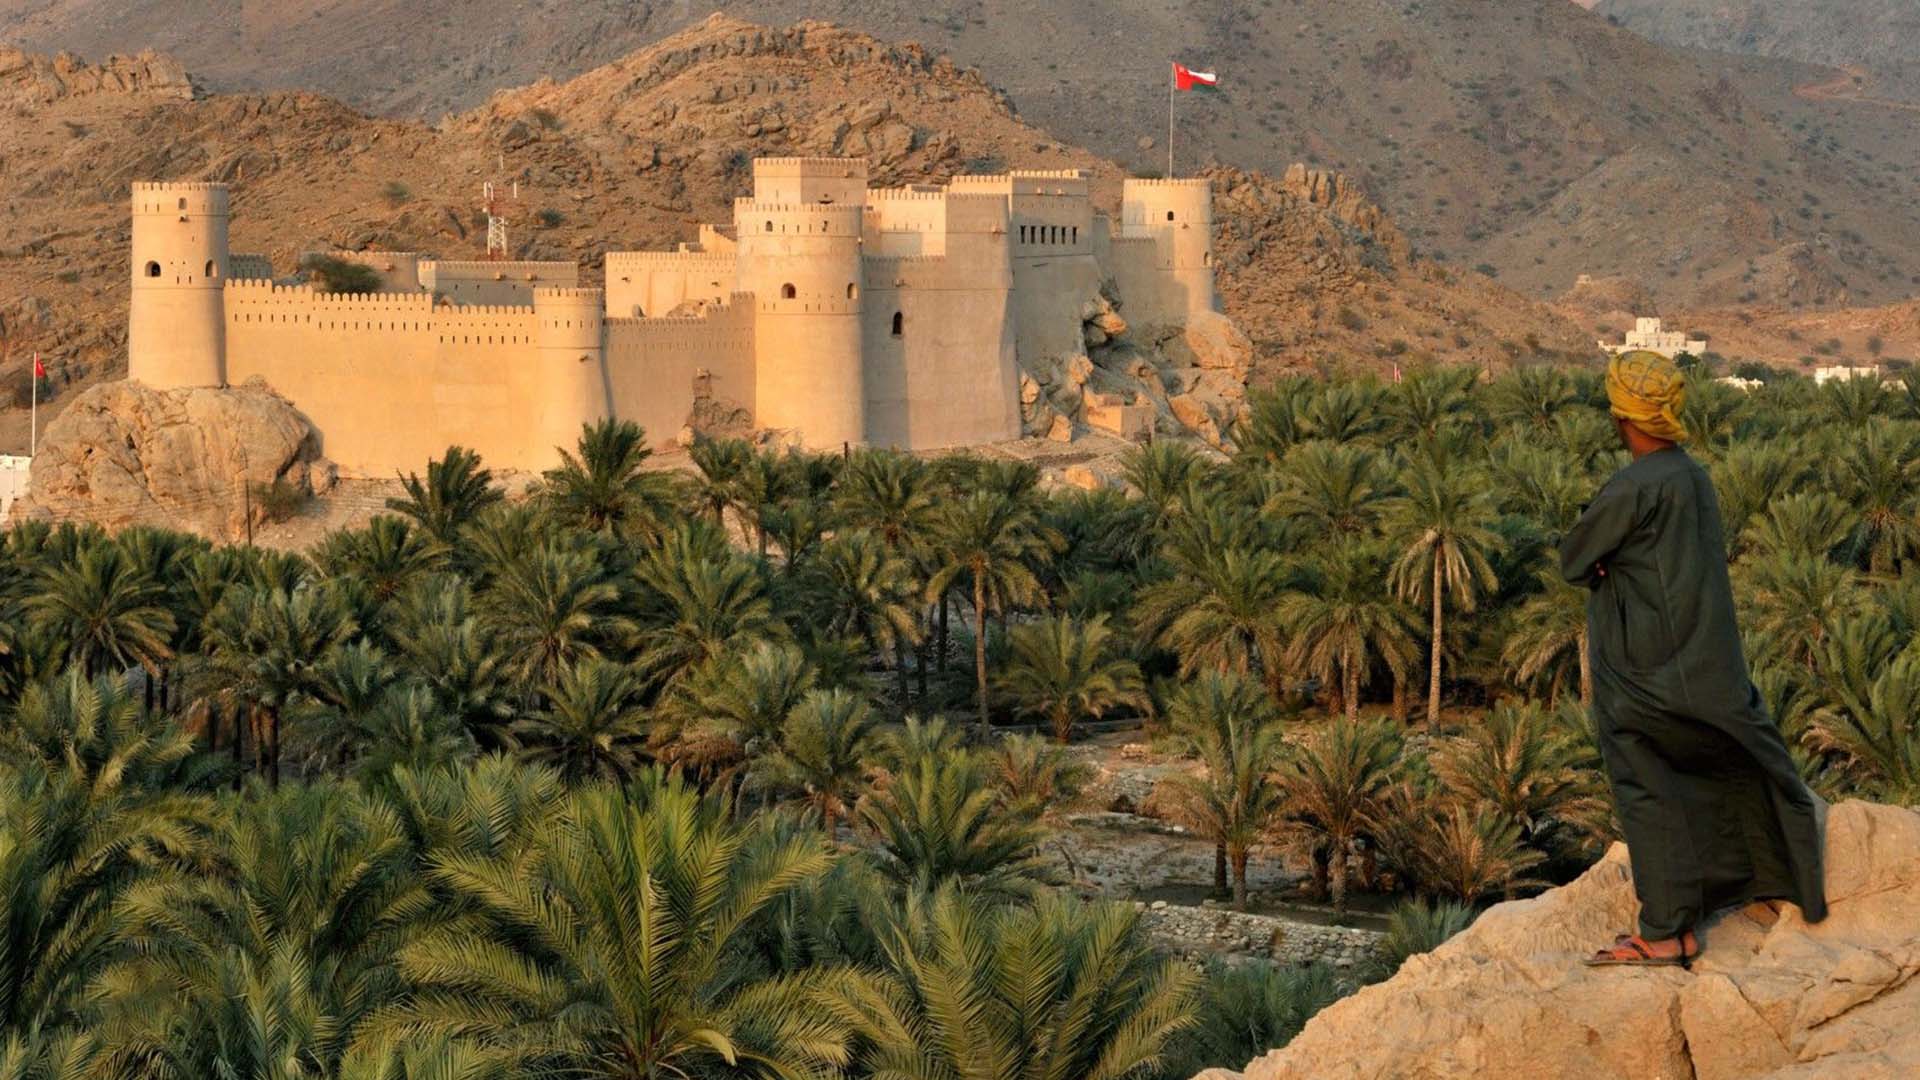 A photograph immortalizes The Nakhl Rustaq Loop with the ancient Nakhl Fort gracefully positioned atop a hill, commanding a view over lush palm groves.